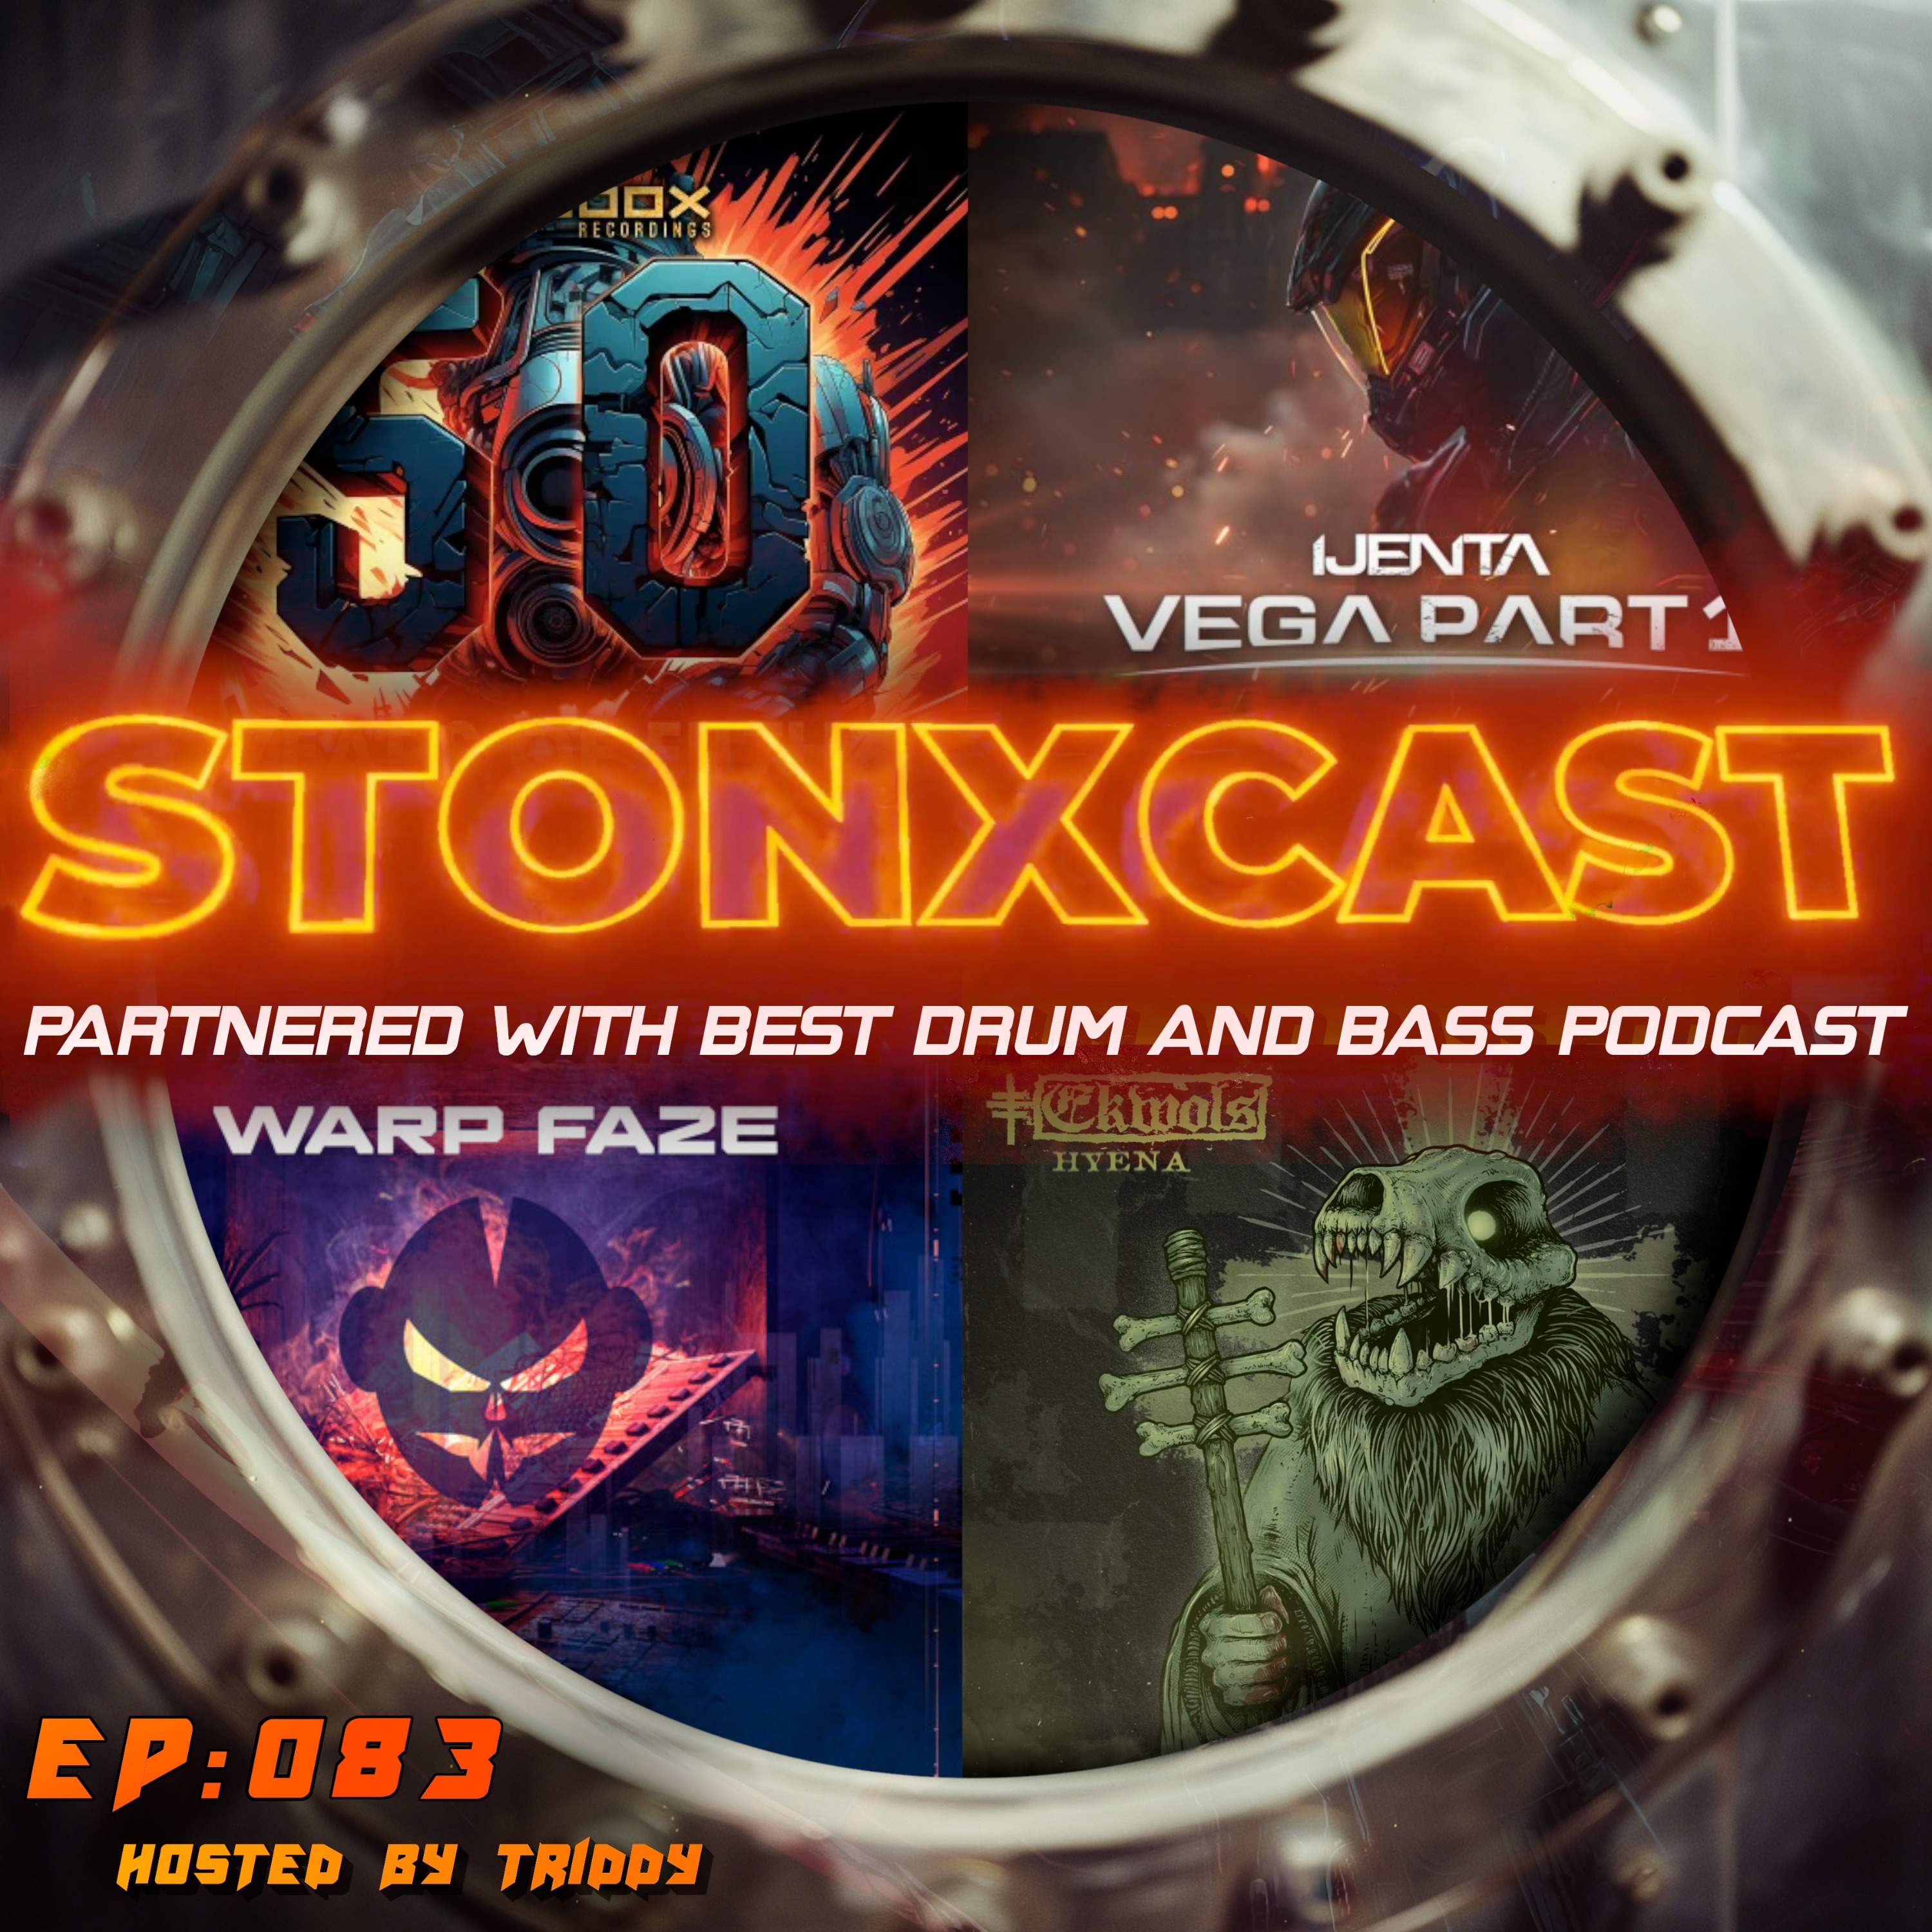 Stonxcast EP:083 - Hosted by Triddy Artwork